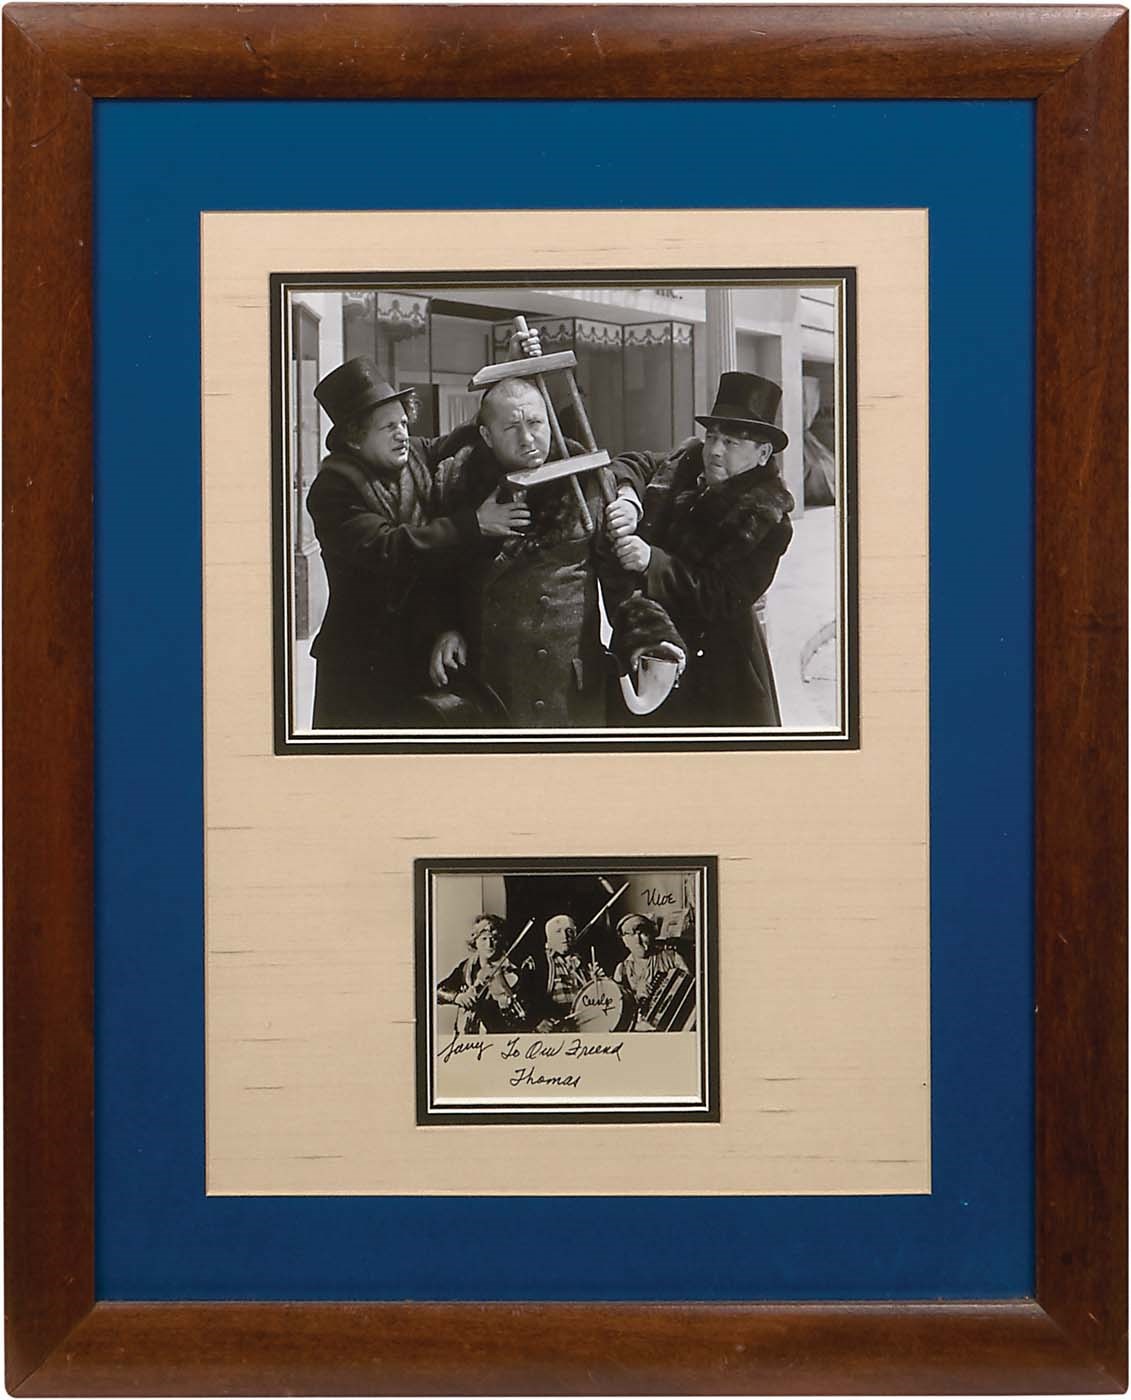 - Three Stooges Signed Photograph Display (all Signed by Moe)